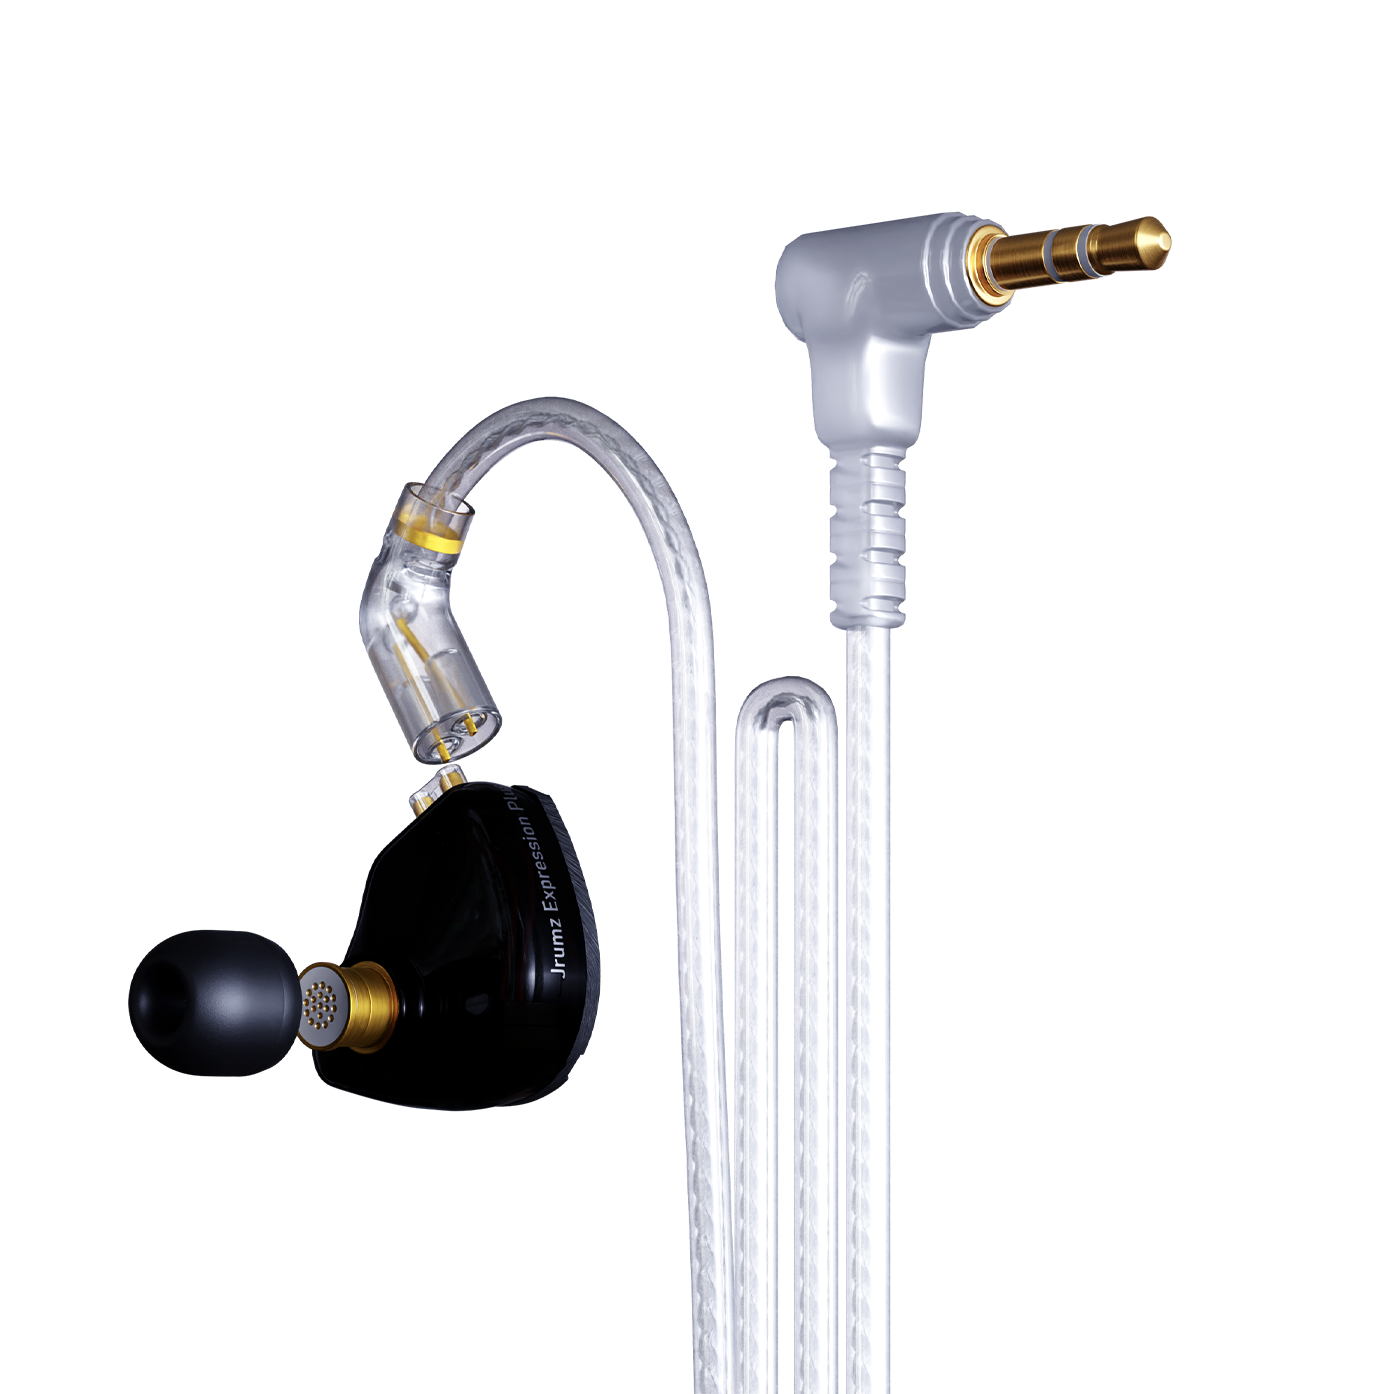 XP01 - Expression Wired Earphones